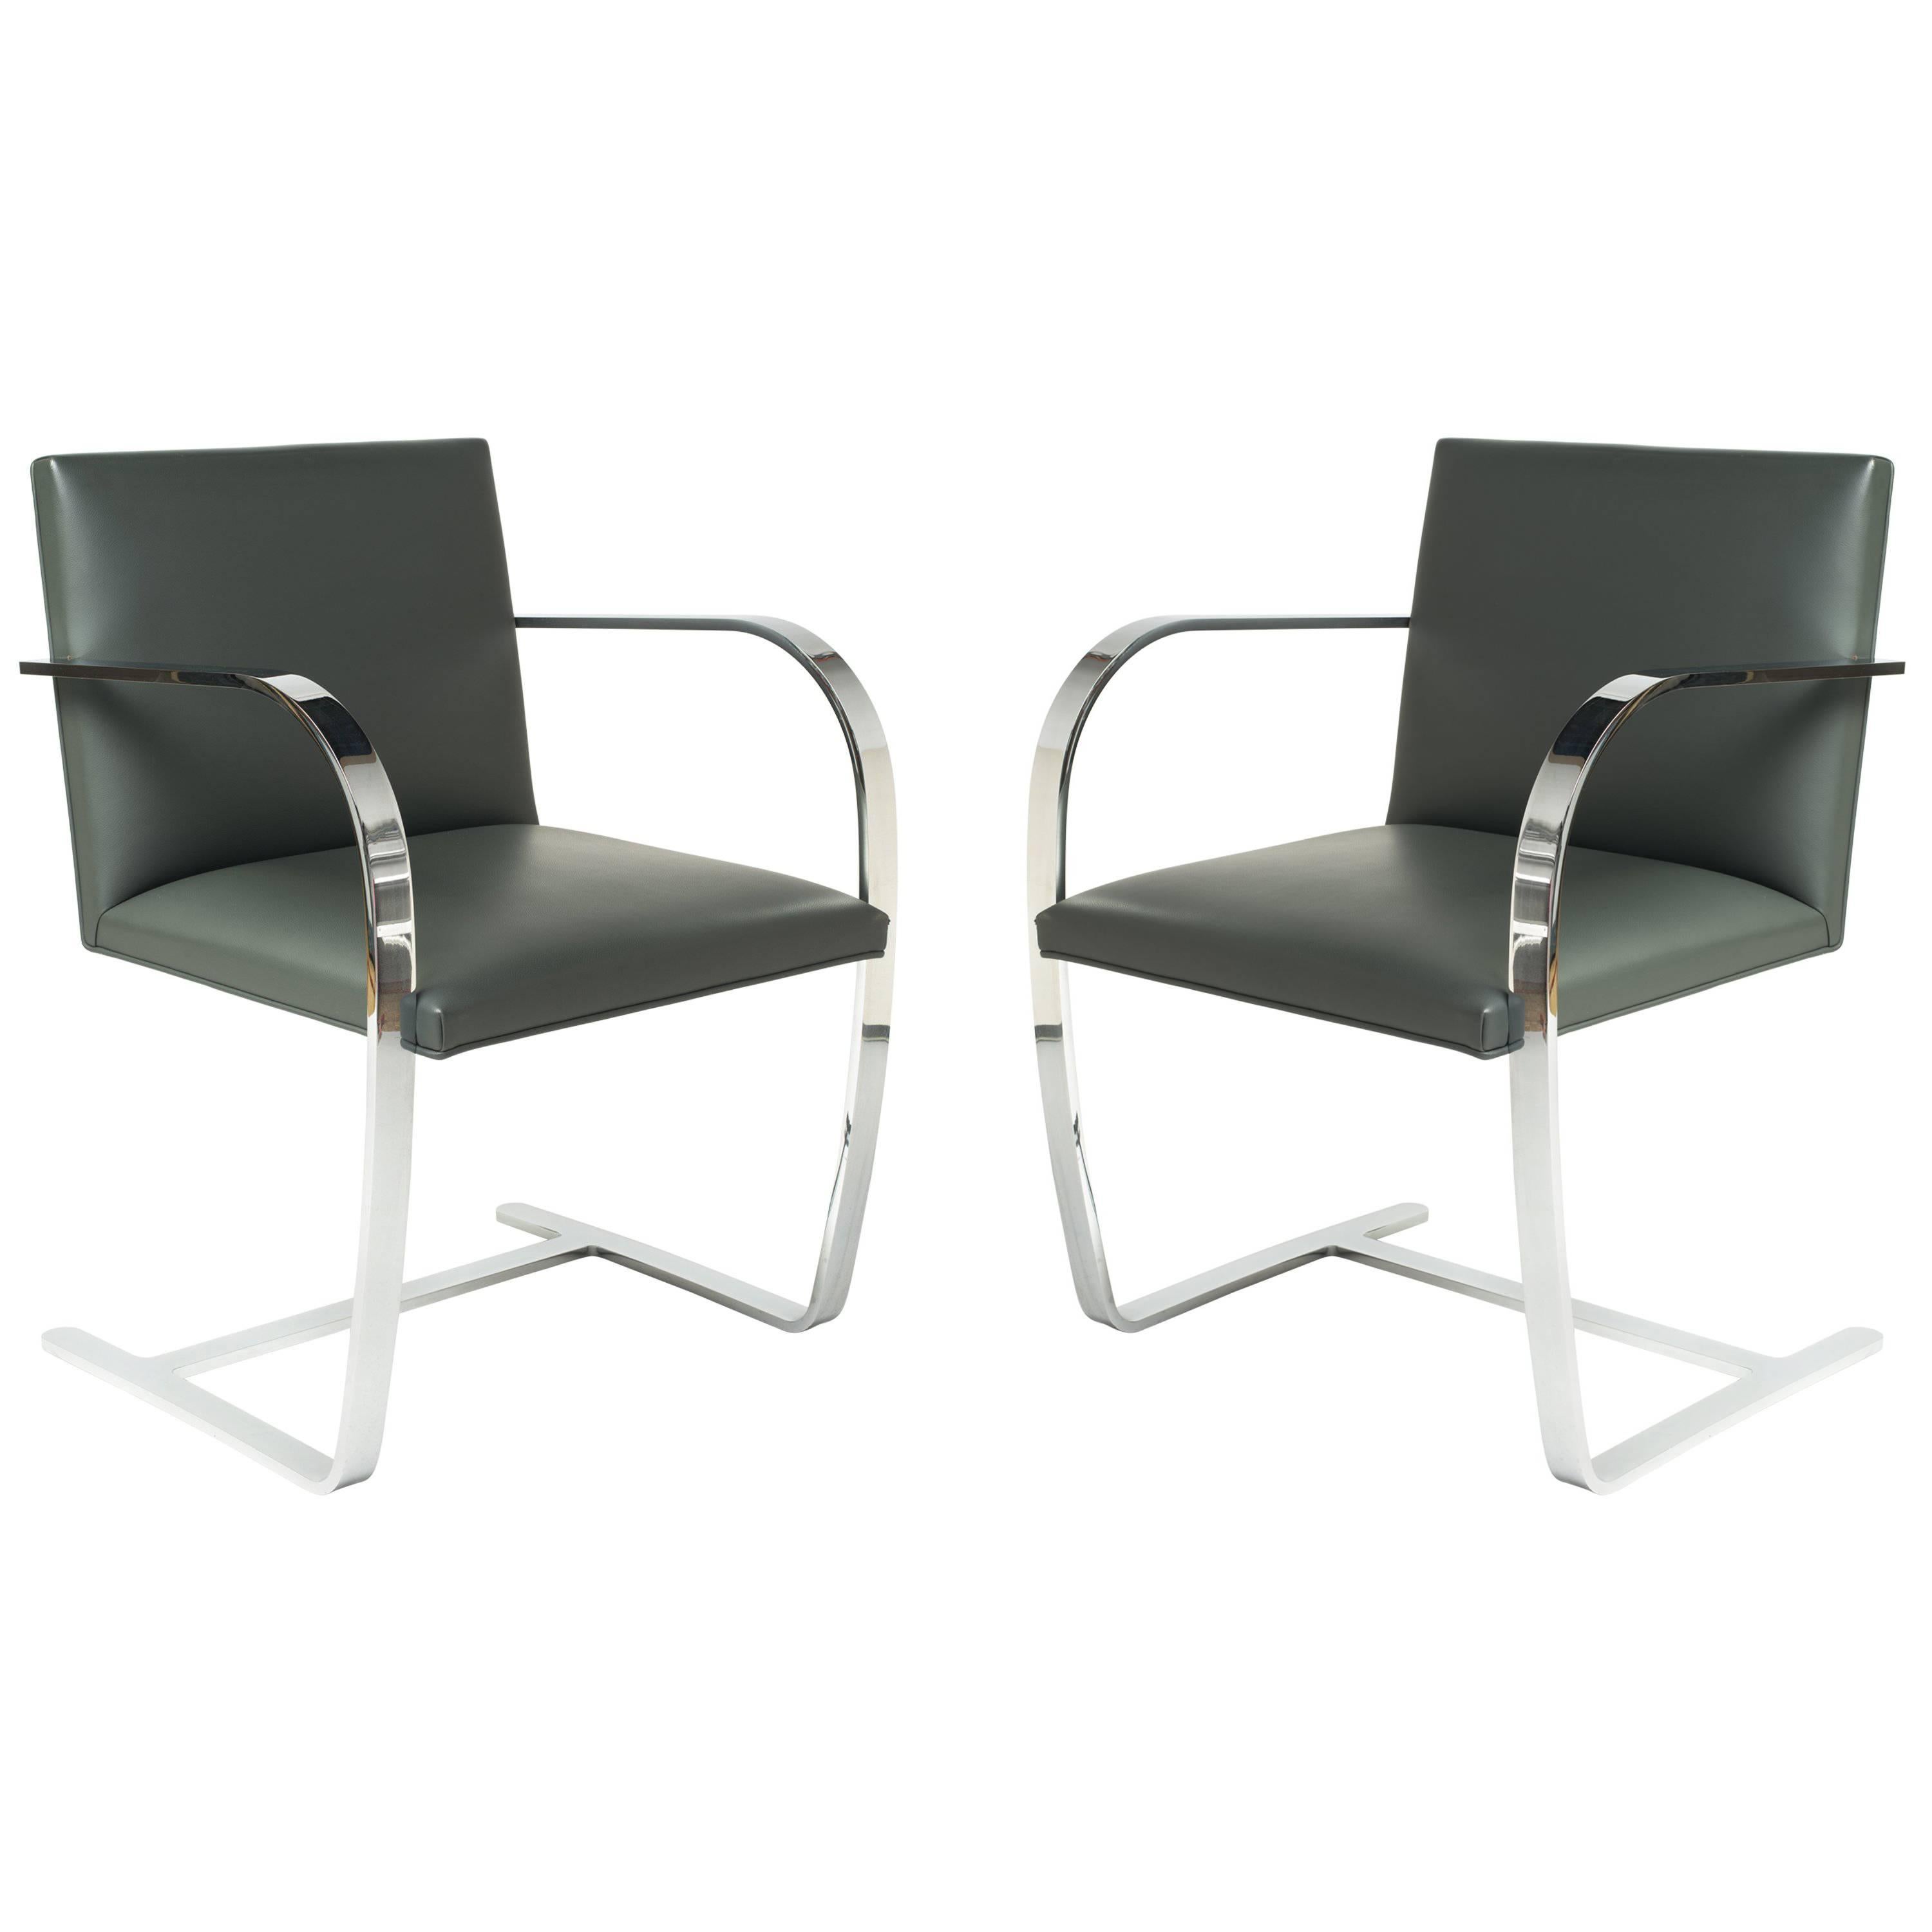 Pair of Brno Chairs in Elephant Grey Leather by Knoll Studio